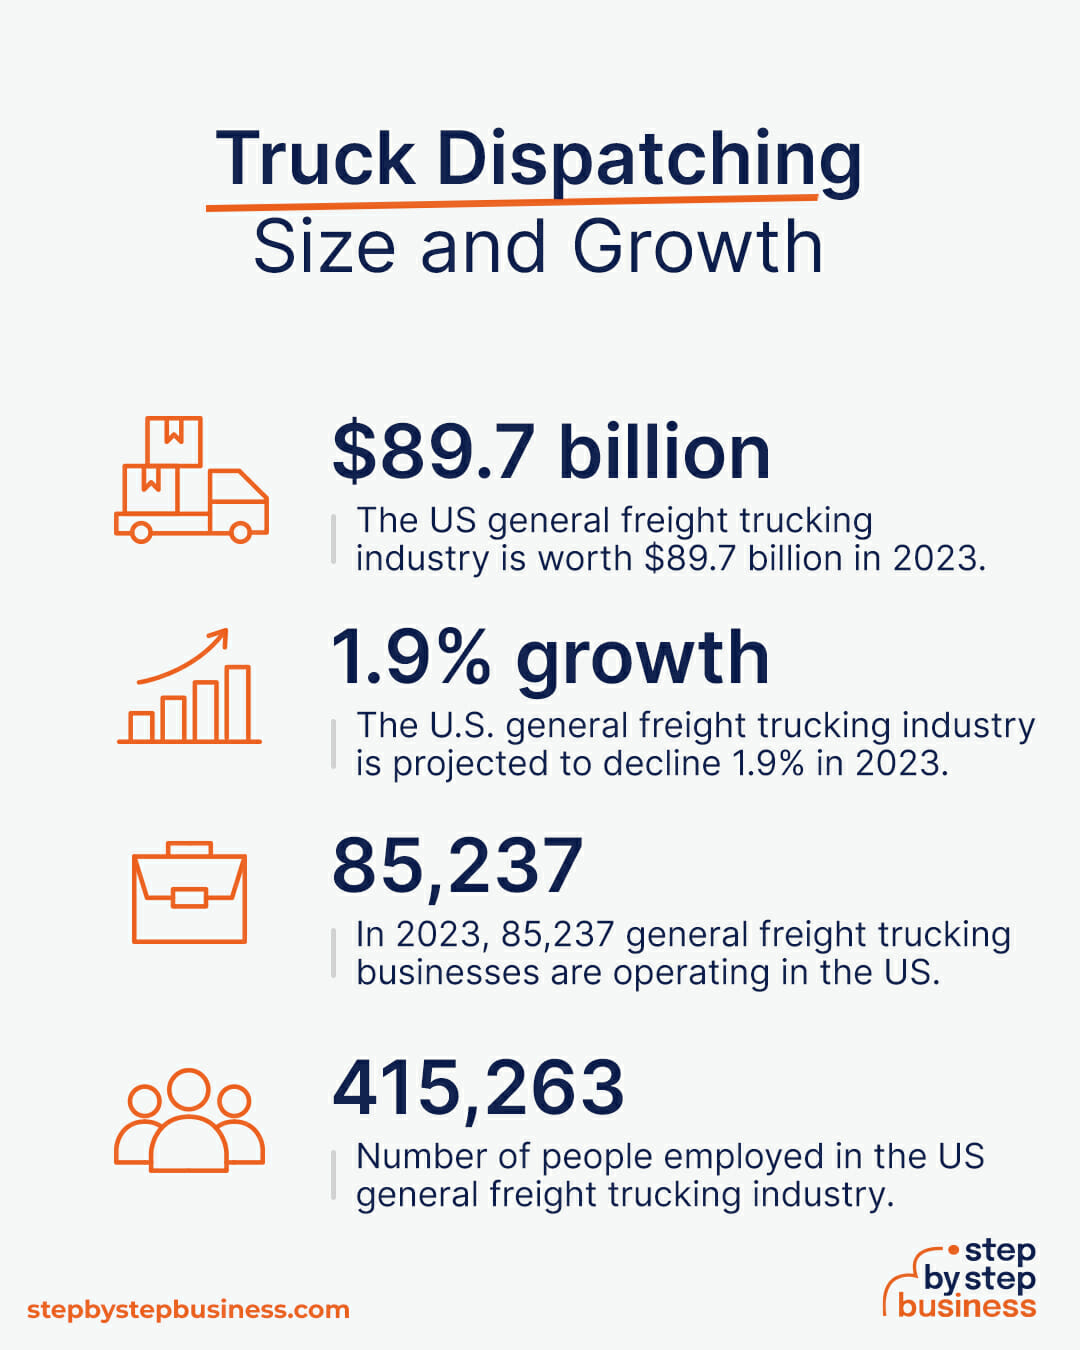 Truck Dispatching industry size and growth